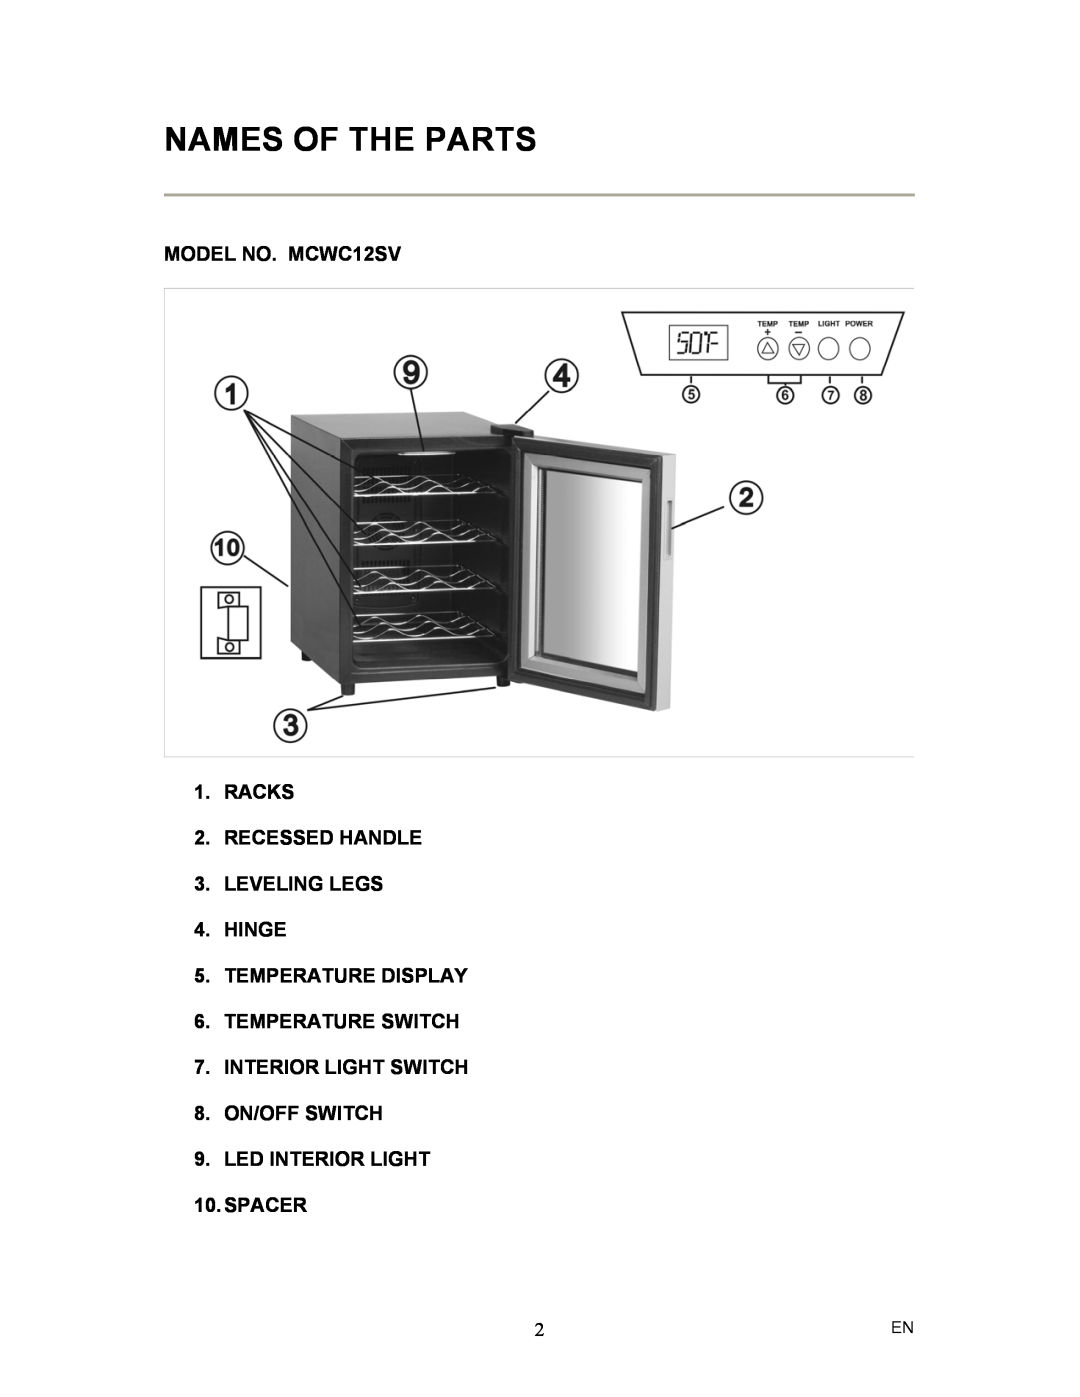 Magic Chef Names Of The Parts, MODEL NO. MCWC12SV 1.RACKS 2.RECESSED HANDLE, TEMPERATURE SWITCH 7.INTERIOR LIGHT SWITCH 